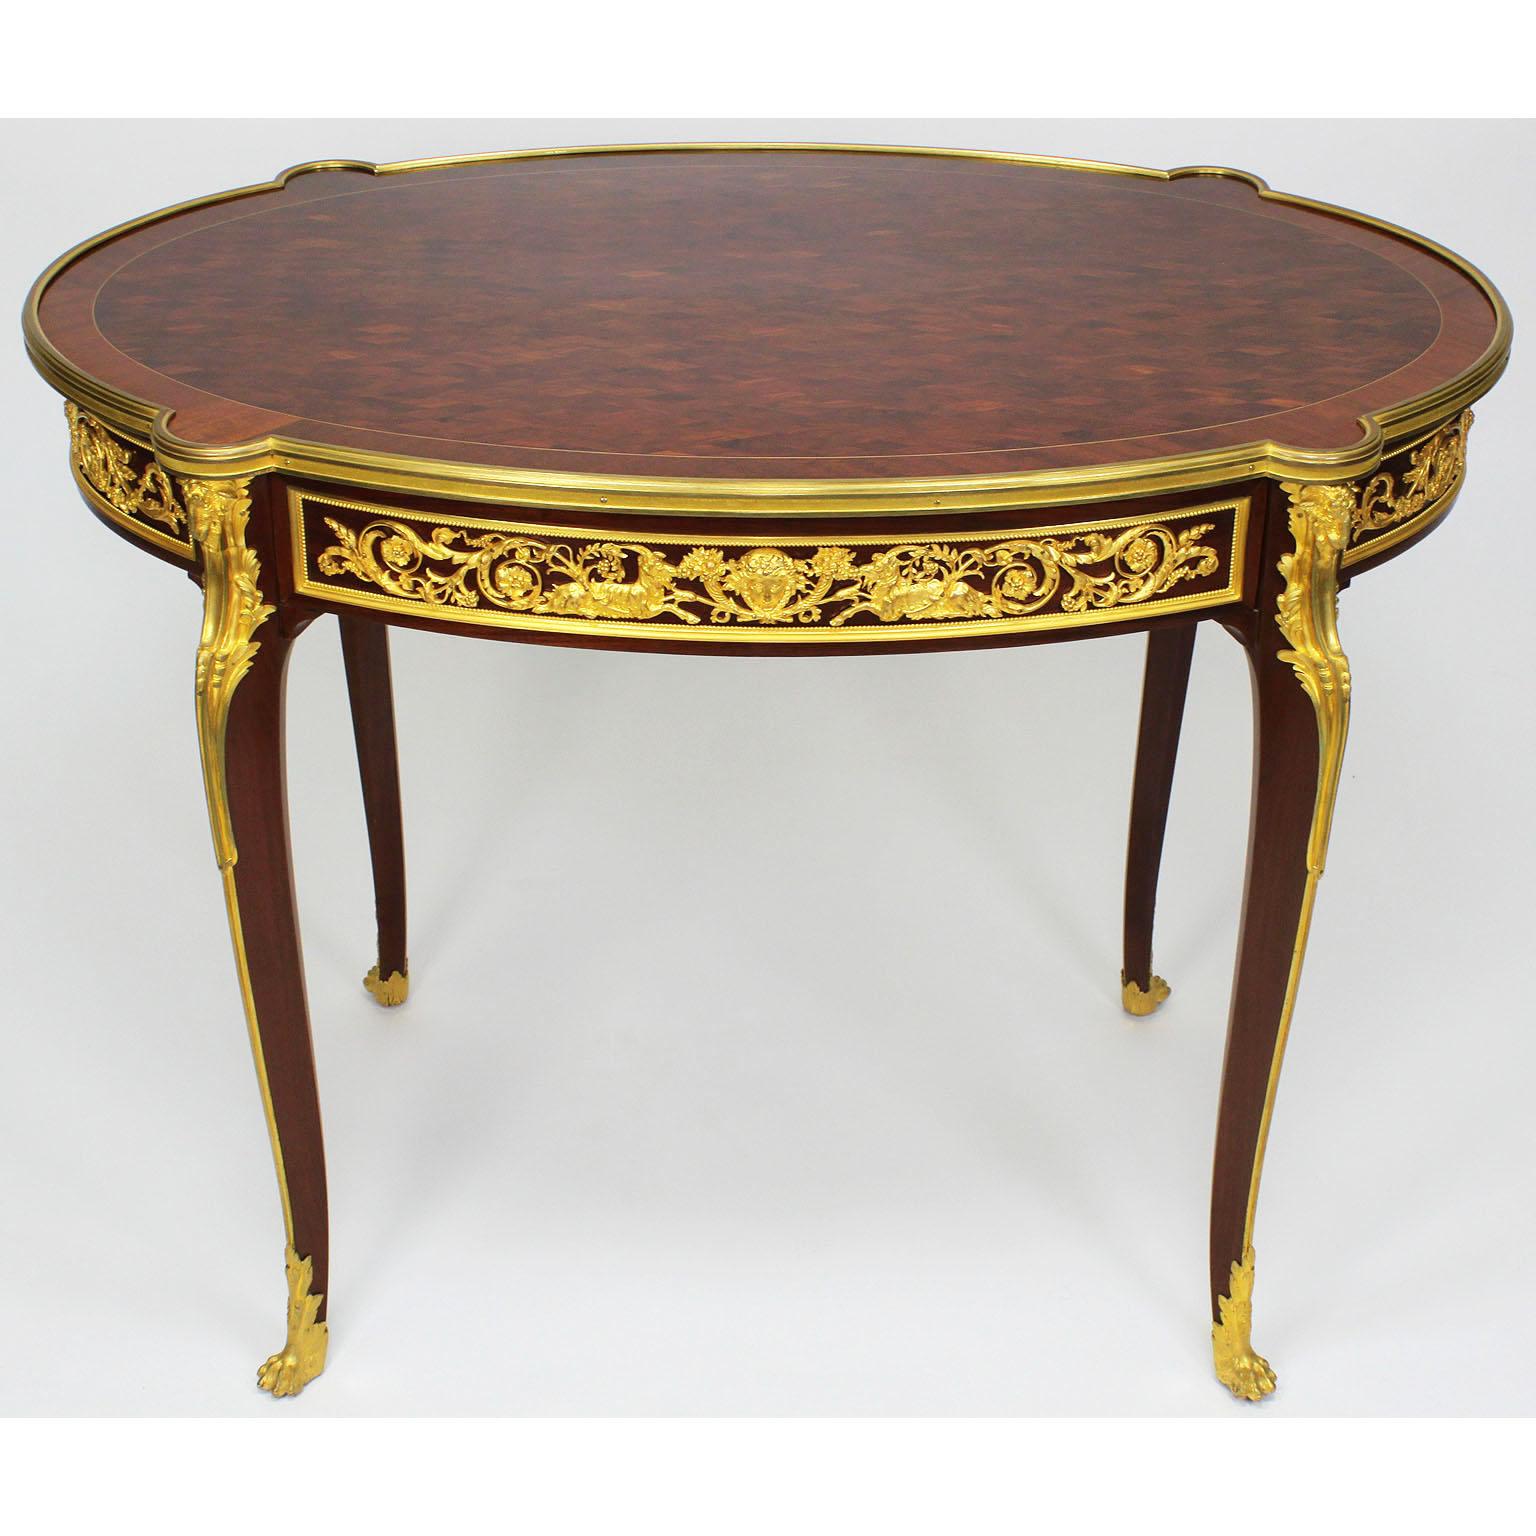 Early 20th Century 19th-20th Century Louis XV Gilt Bronze-Mounted Table, Francois Linke Attributed For Sale